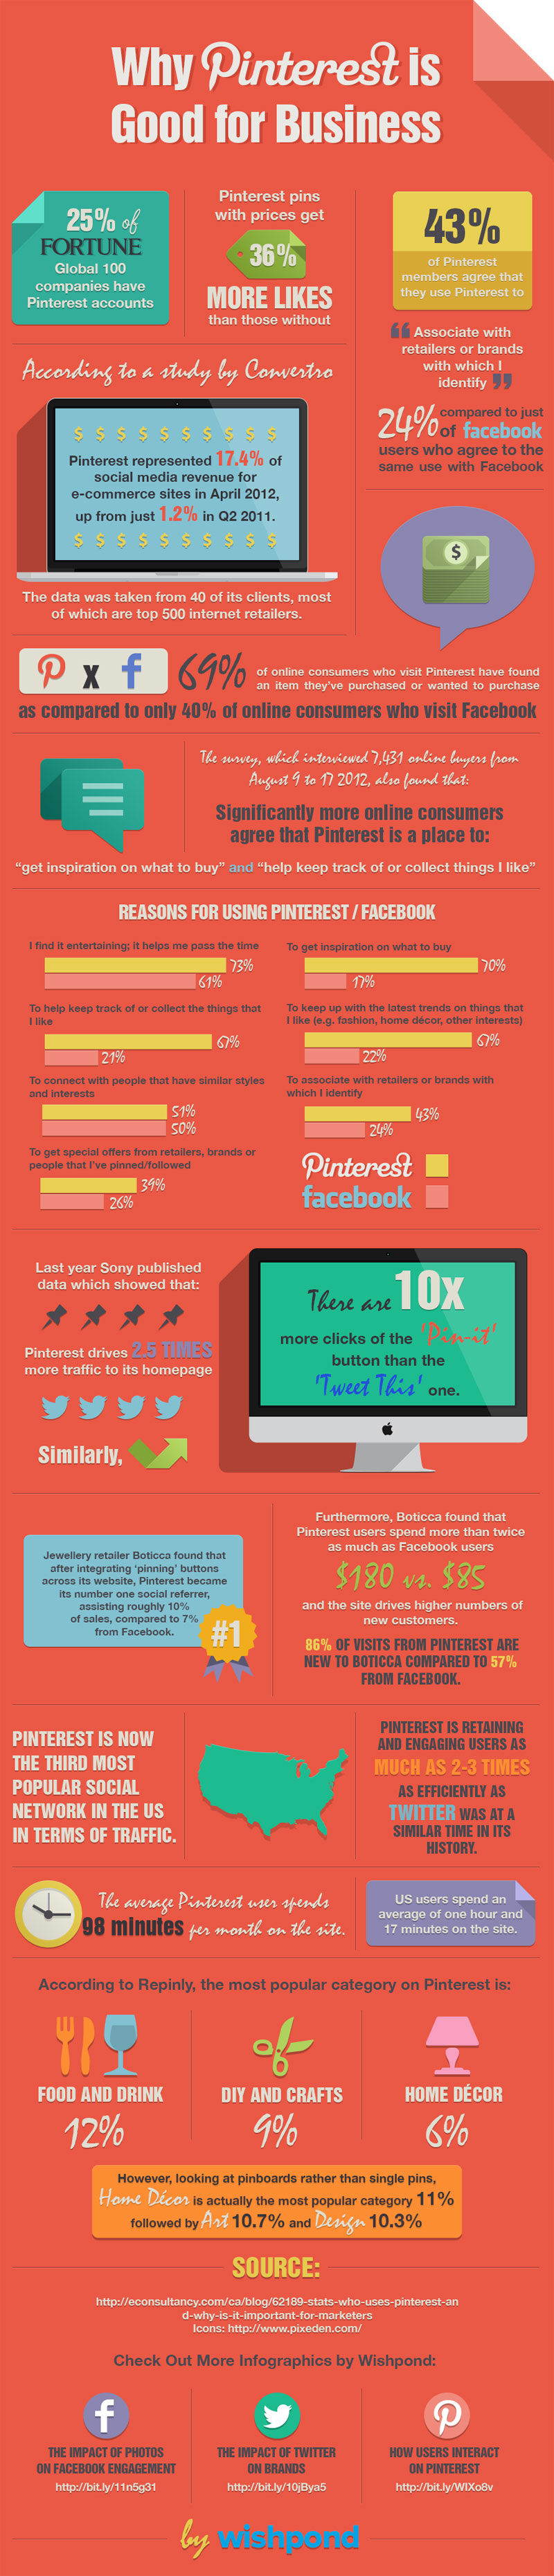 Pinterest Small Business Infographic